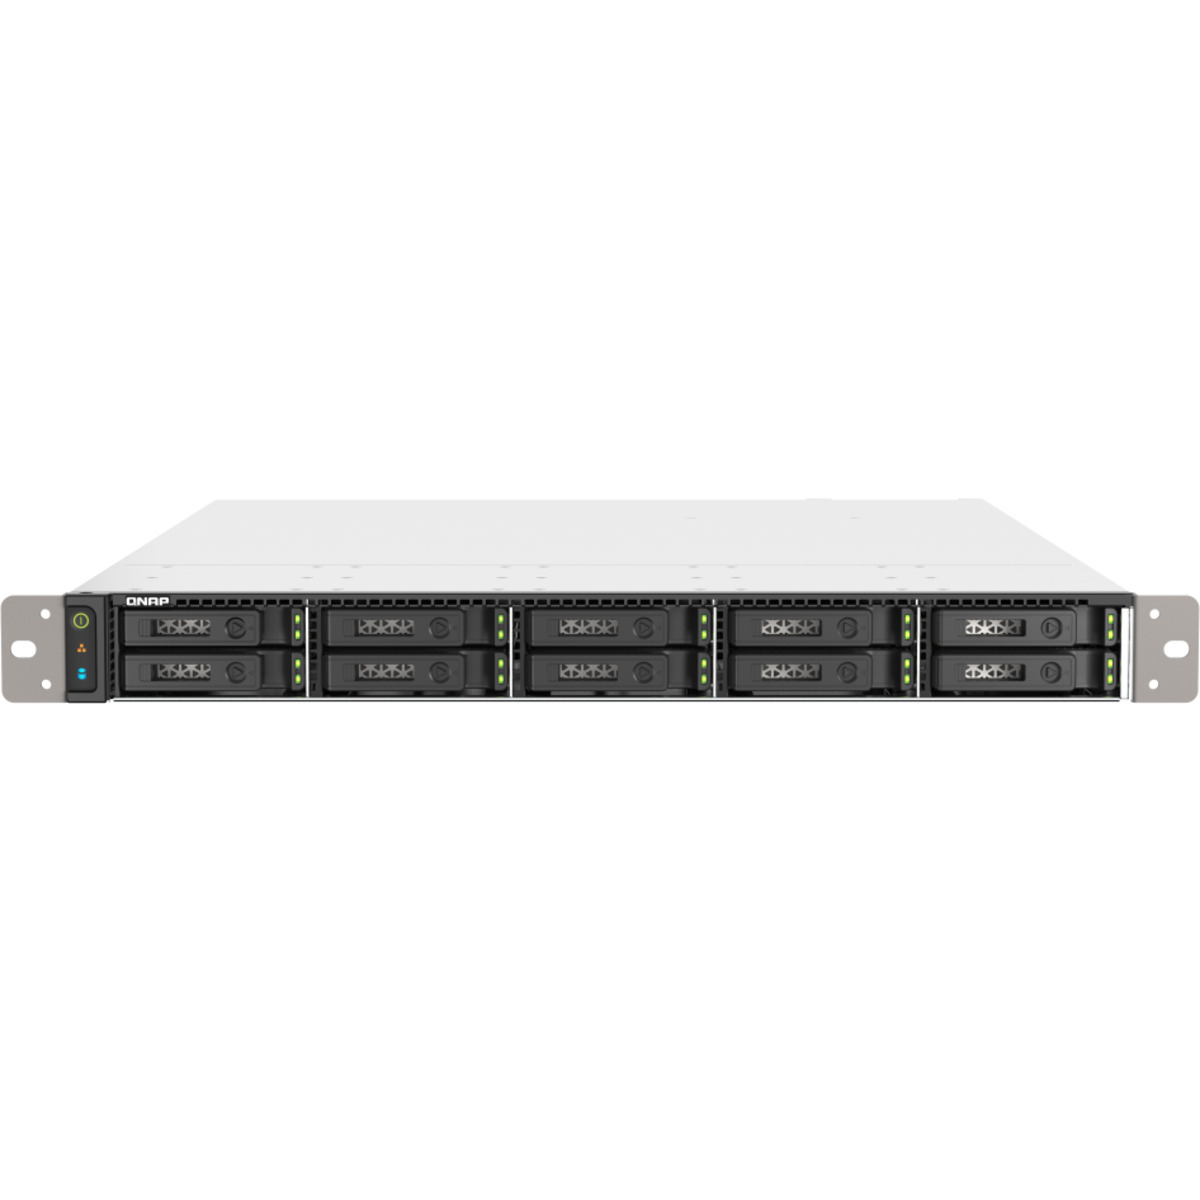 QNAP TS-h1090FU-7232P 8tb 10-Bay RackMount Large Business / Enterprise NAS - Network Attached Storage Device 8x1tb Samsung 870 EVO MZ-77E1T0BAM 2.5 560/530MB/s SATA 6Gb/s SSD CONSUMER Class Drives Installed - Burn-In Tested TS-h1090FU-7232P